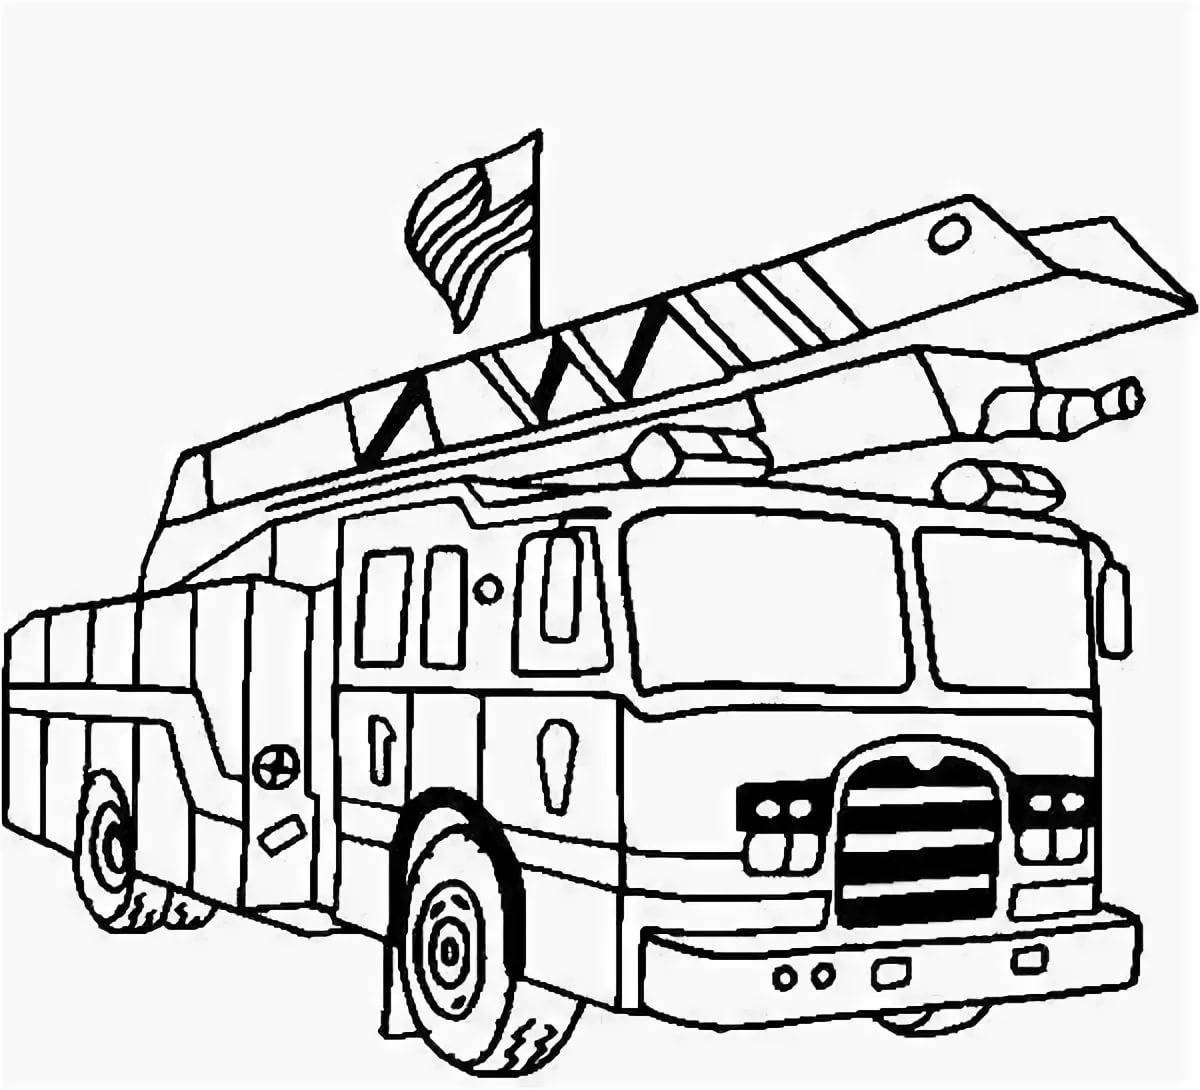 Fantastic fire truck coloring for kids